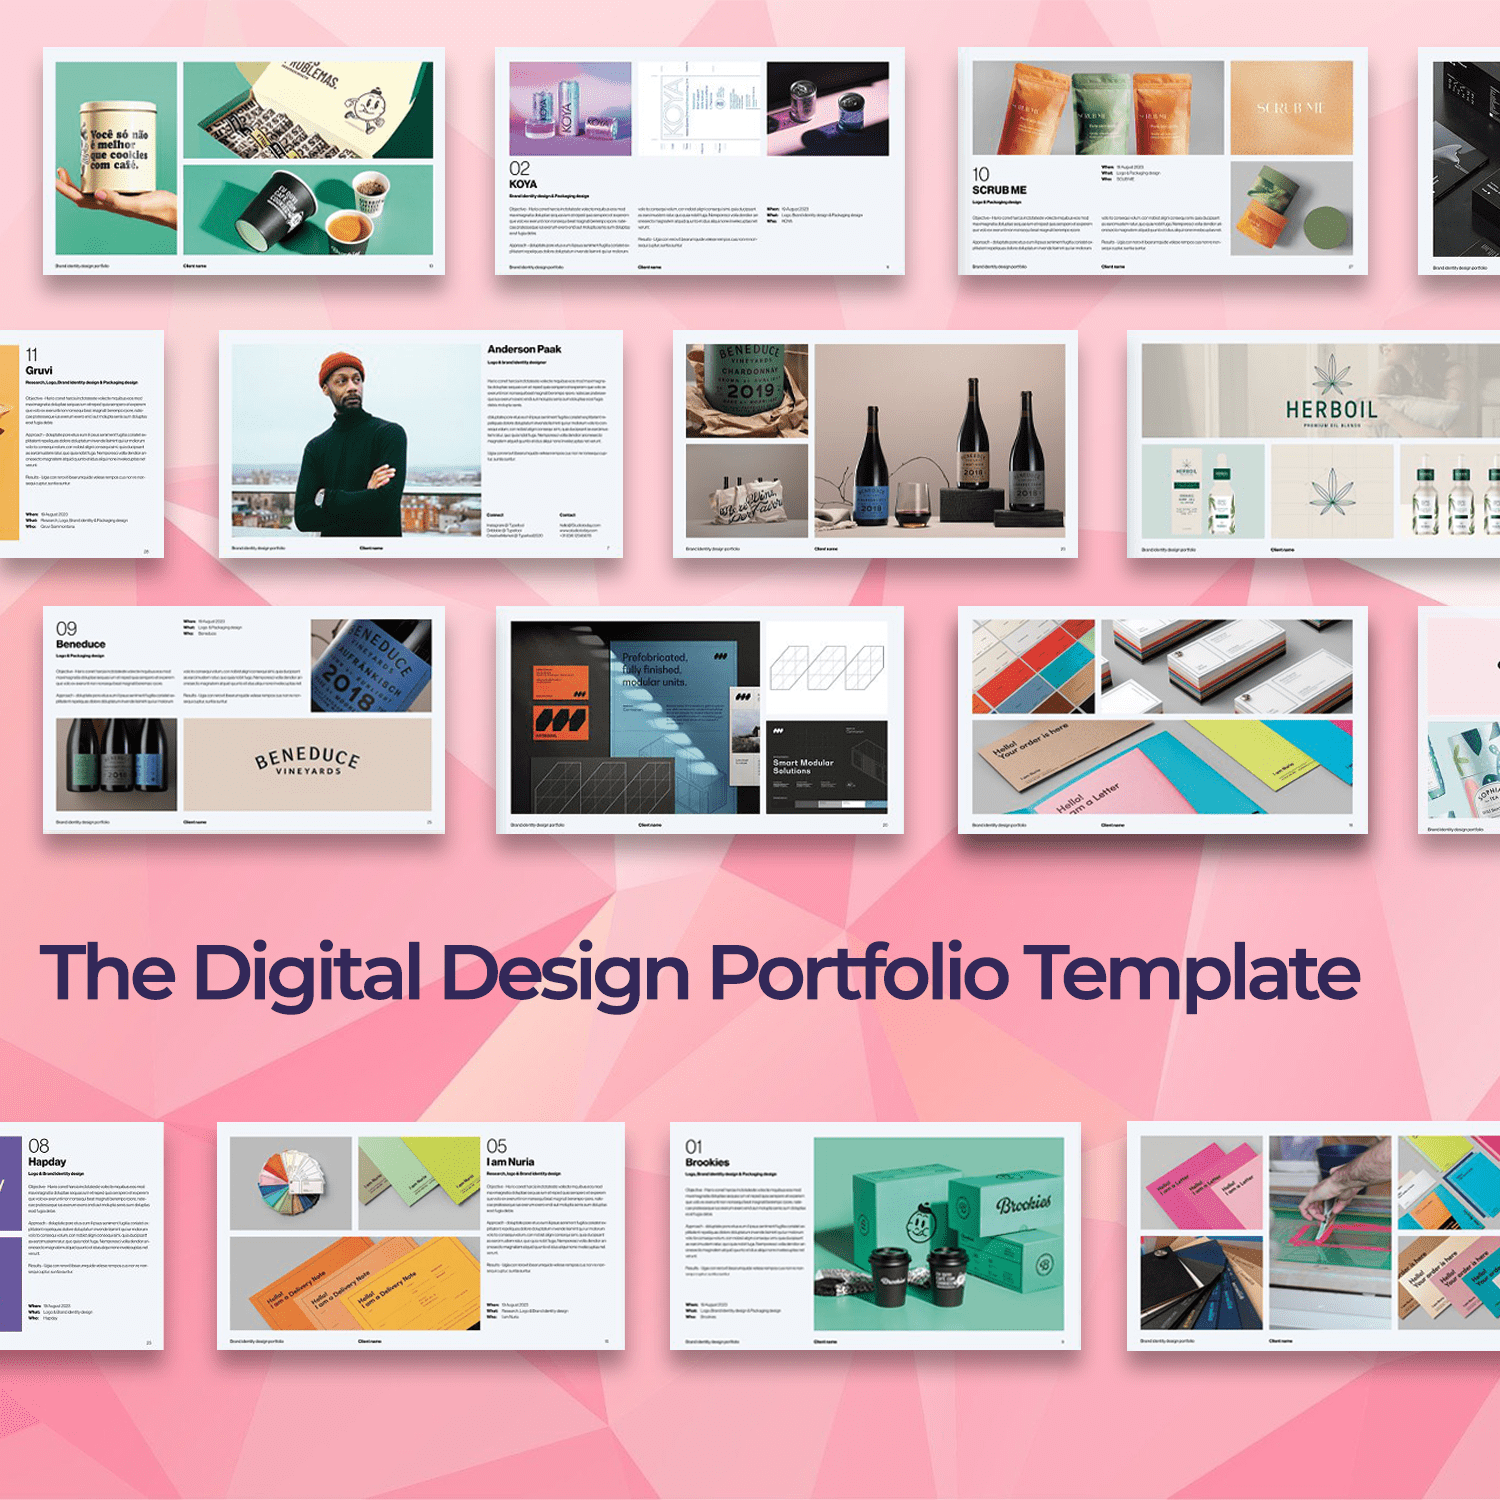 The Portfolio Template is a series of 26 creative and fully customizable layout templates for Adobe InDesign.